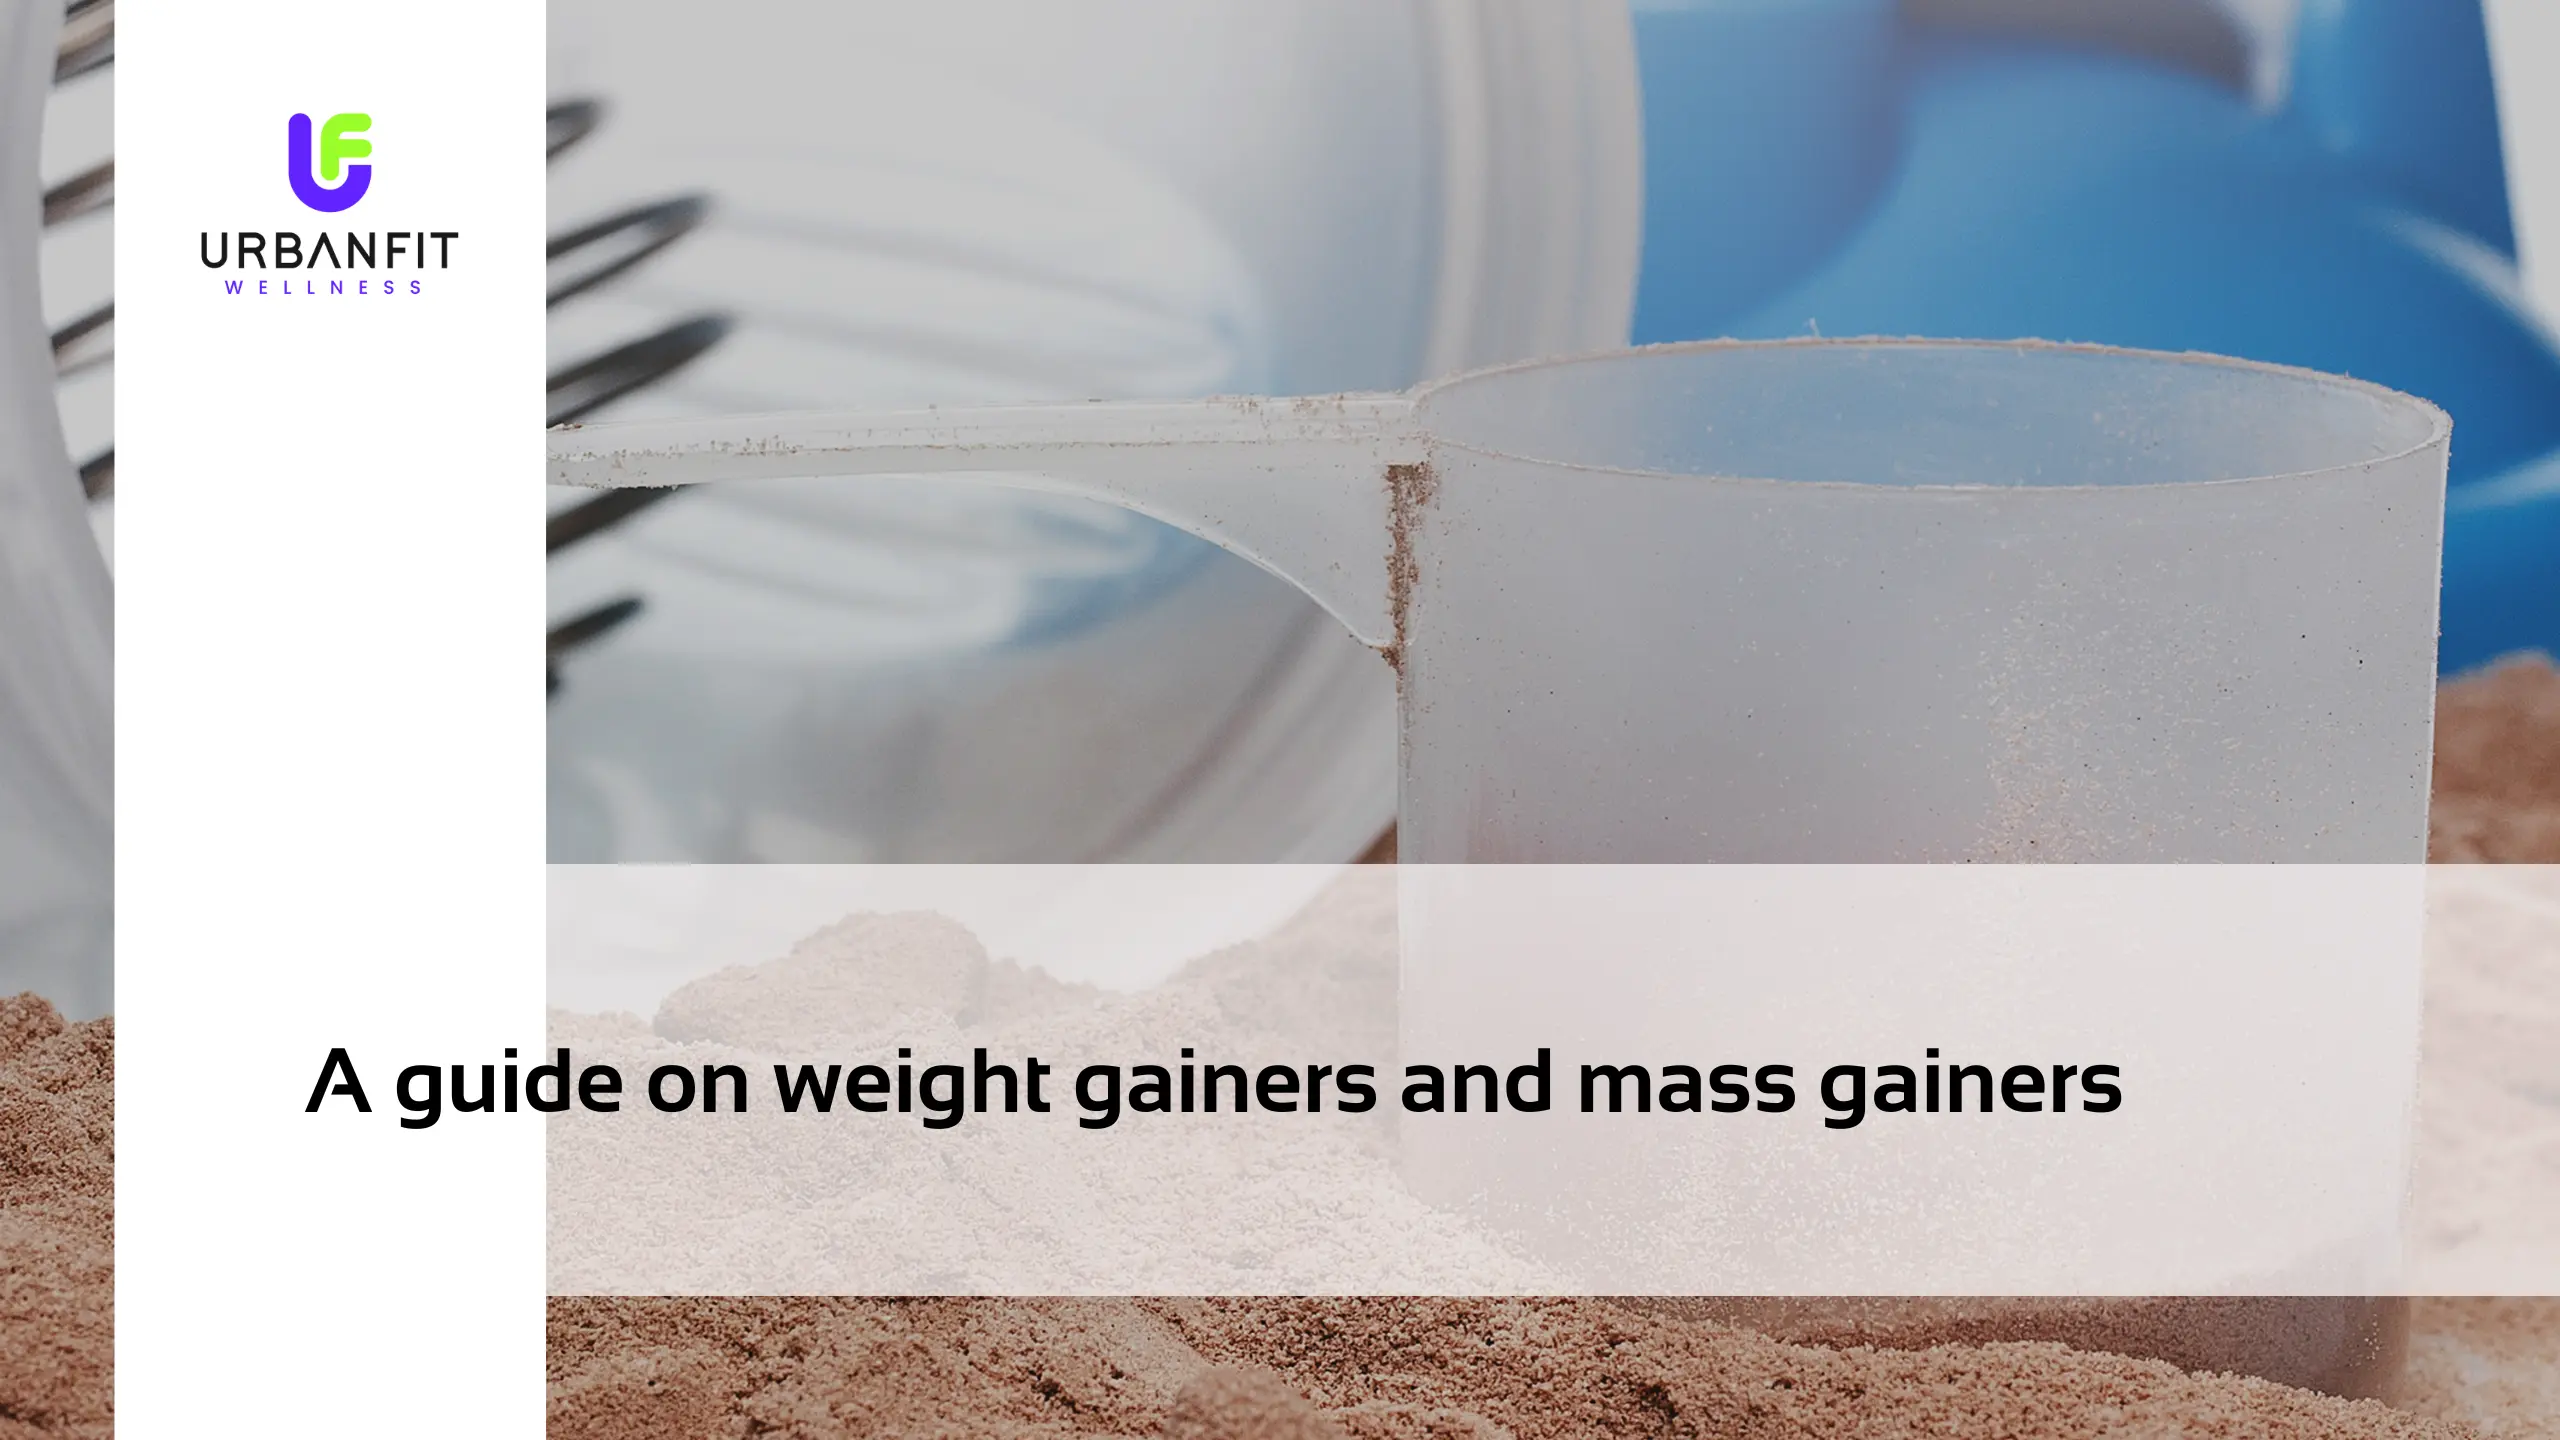  A guide on weight gainers and mass gainers